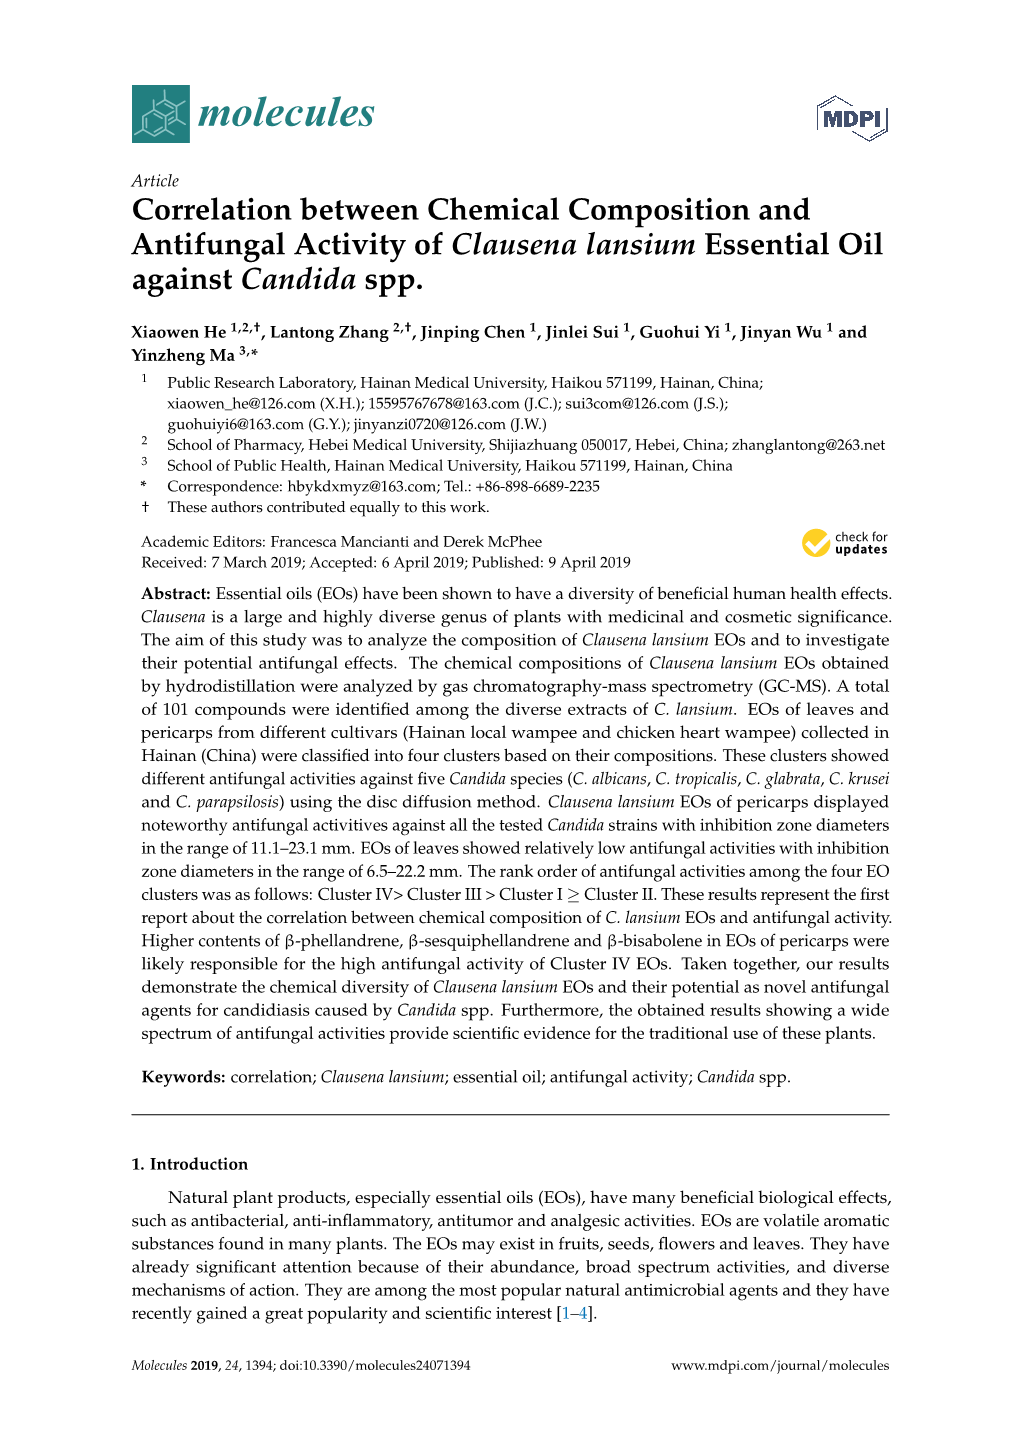 Correlation Between Chemical Composition and Antifungal Activity of Clausena Lansium Essential Oil Against Candida Spp